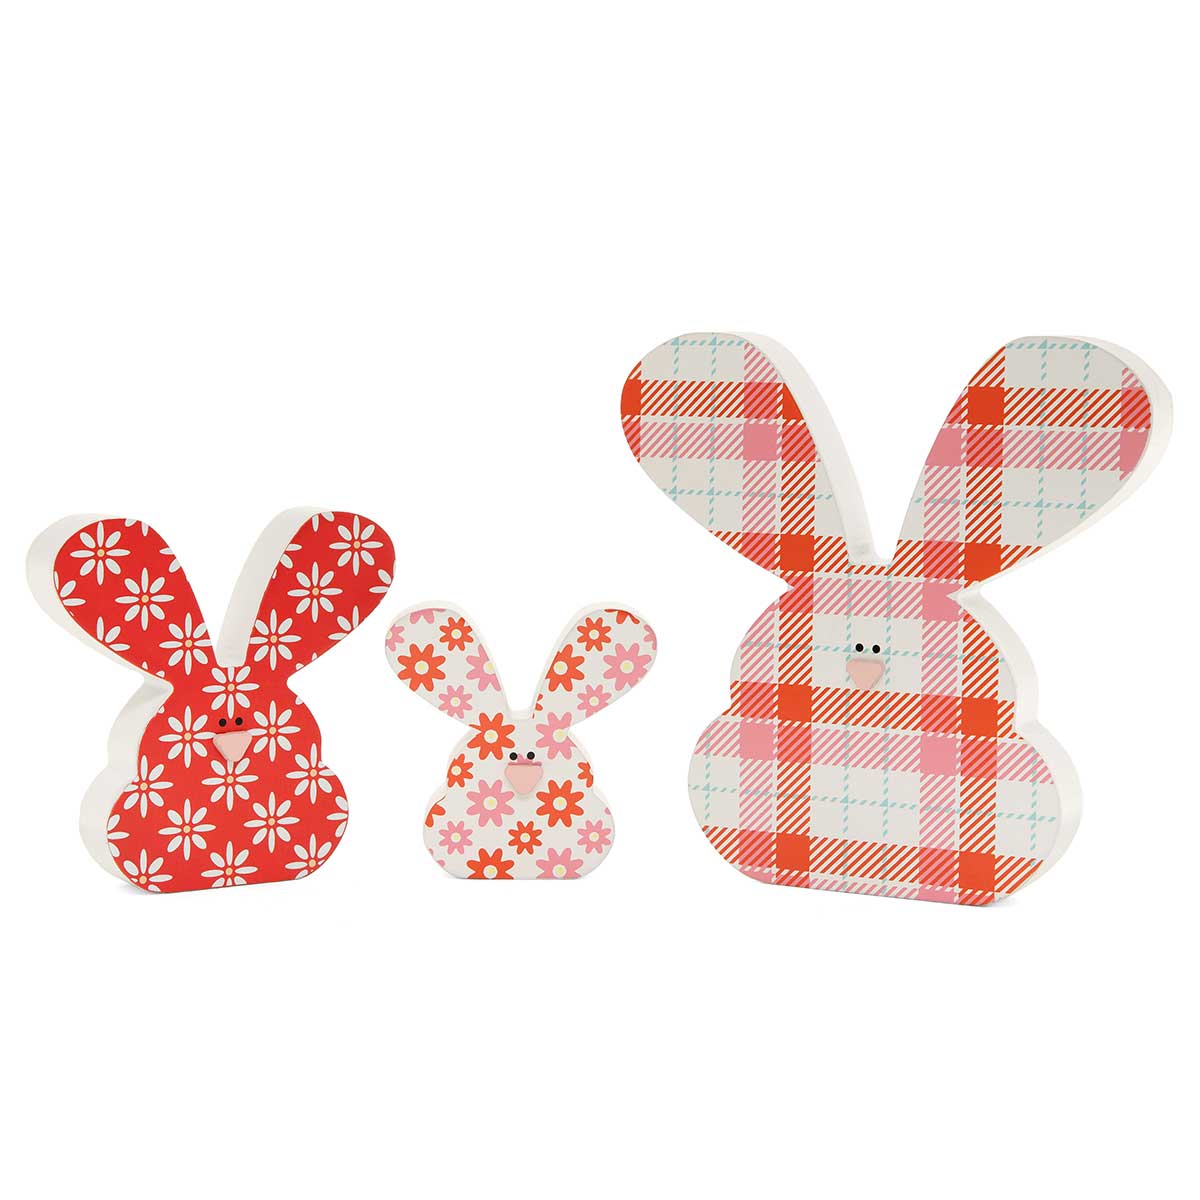 CORAL FAIR WOOD BUNNY SIT-A-BOUT CORAL/WHITE FLORAL